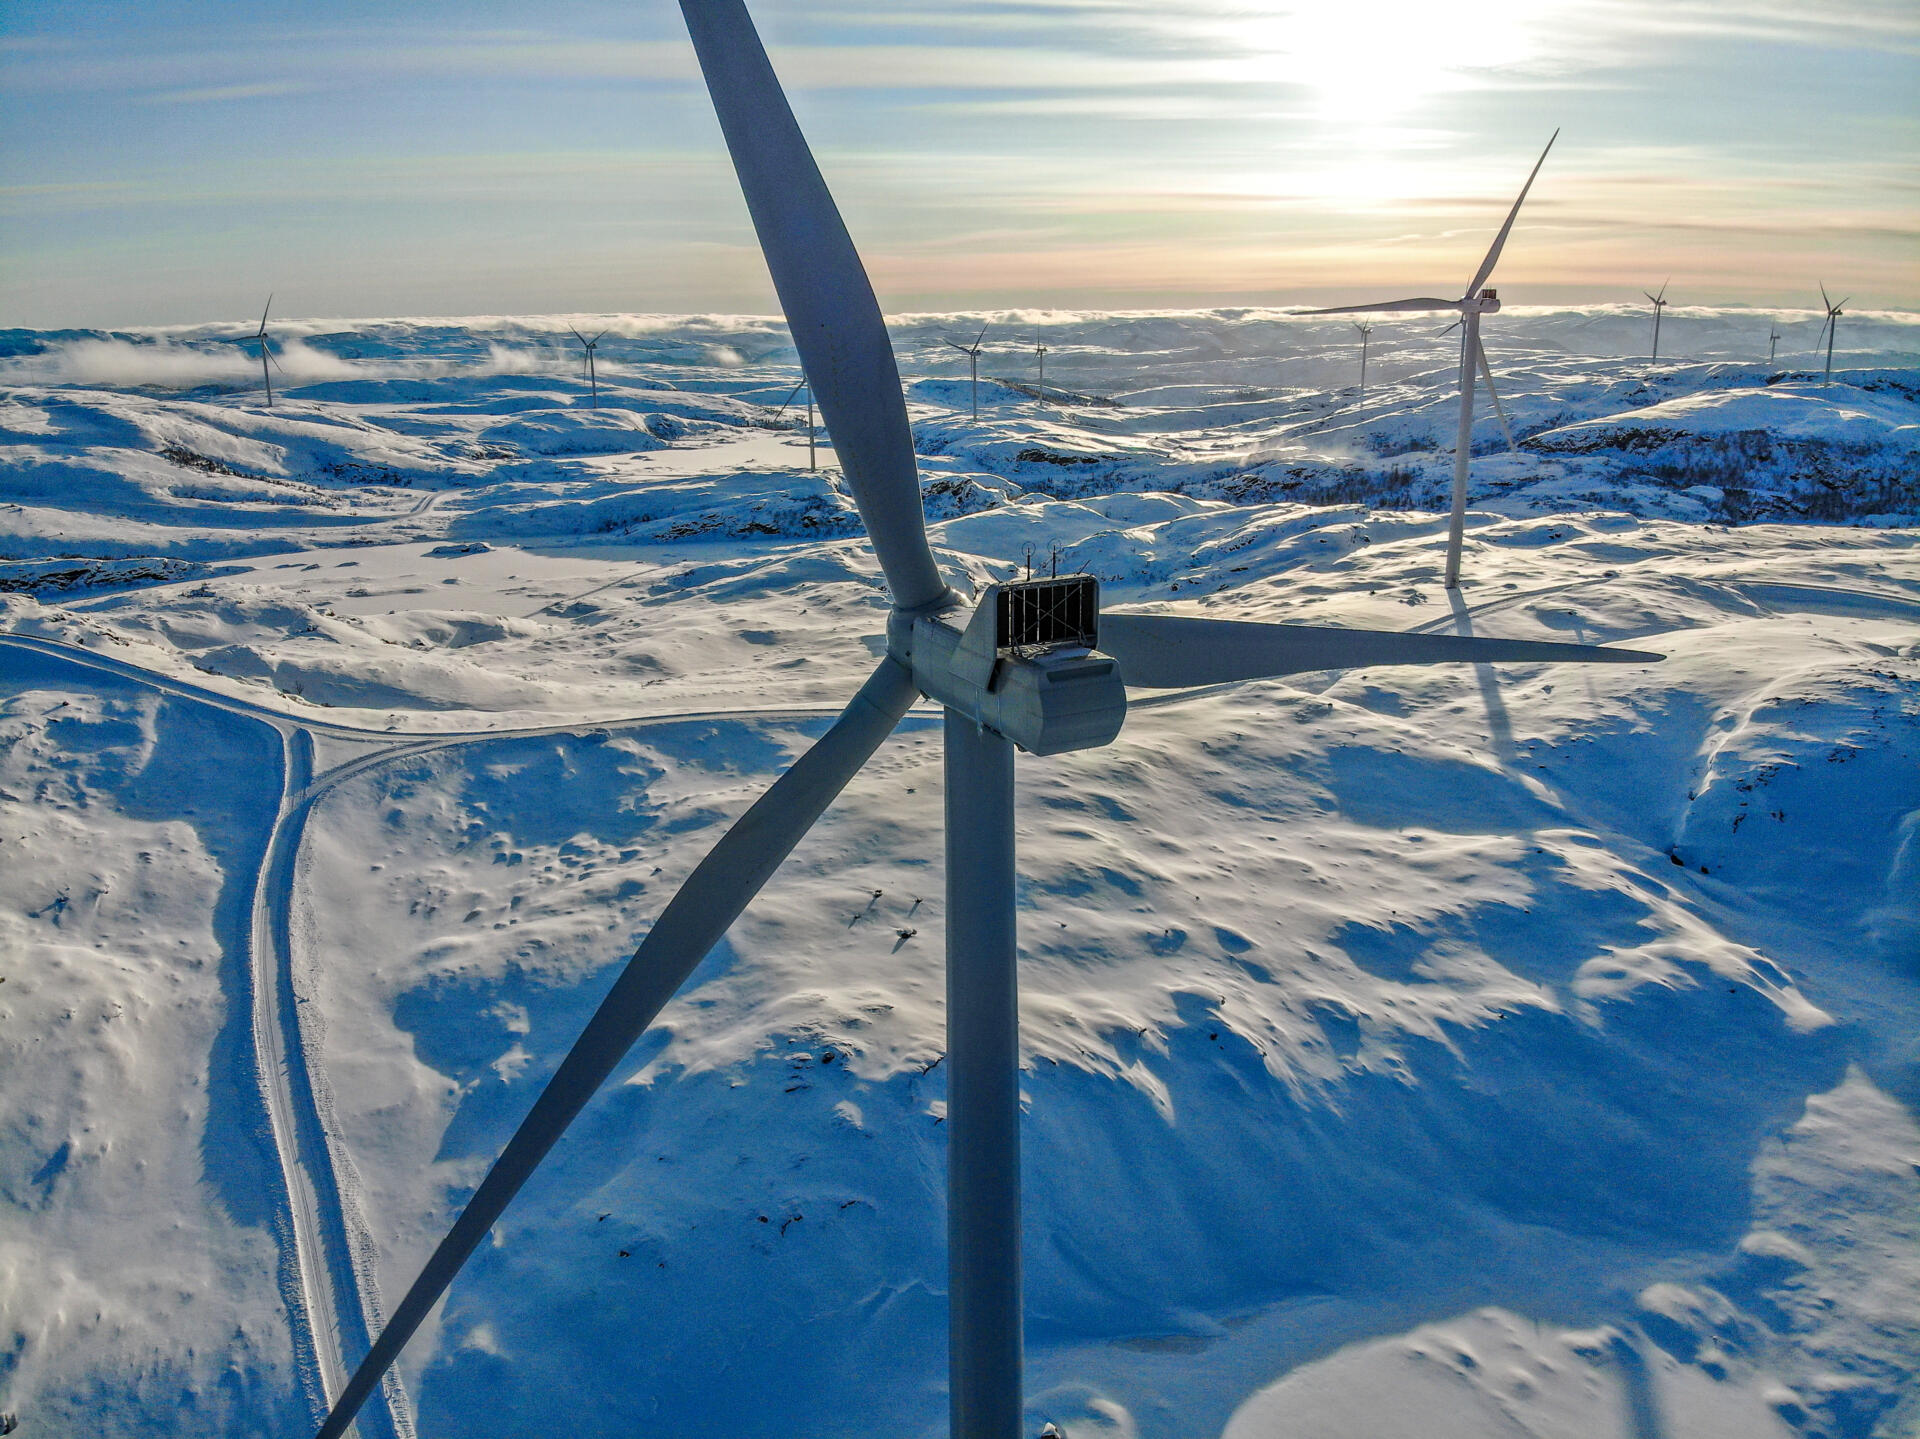 Workshop invitation: how turbine design may reduce ice fall risks for personnel. Location: Winterwind 2024